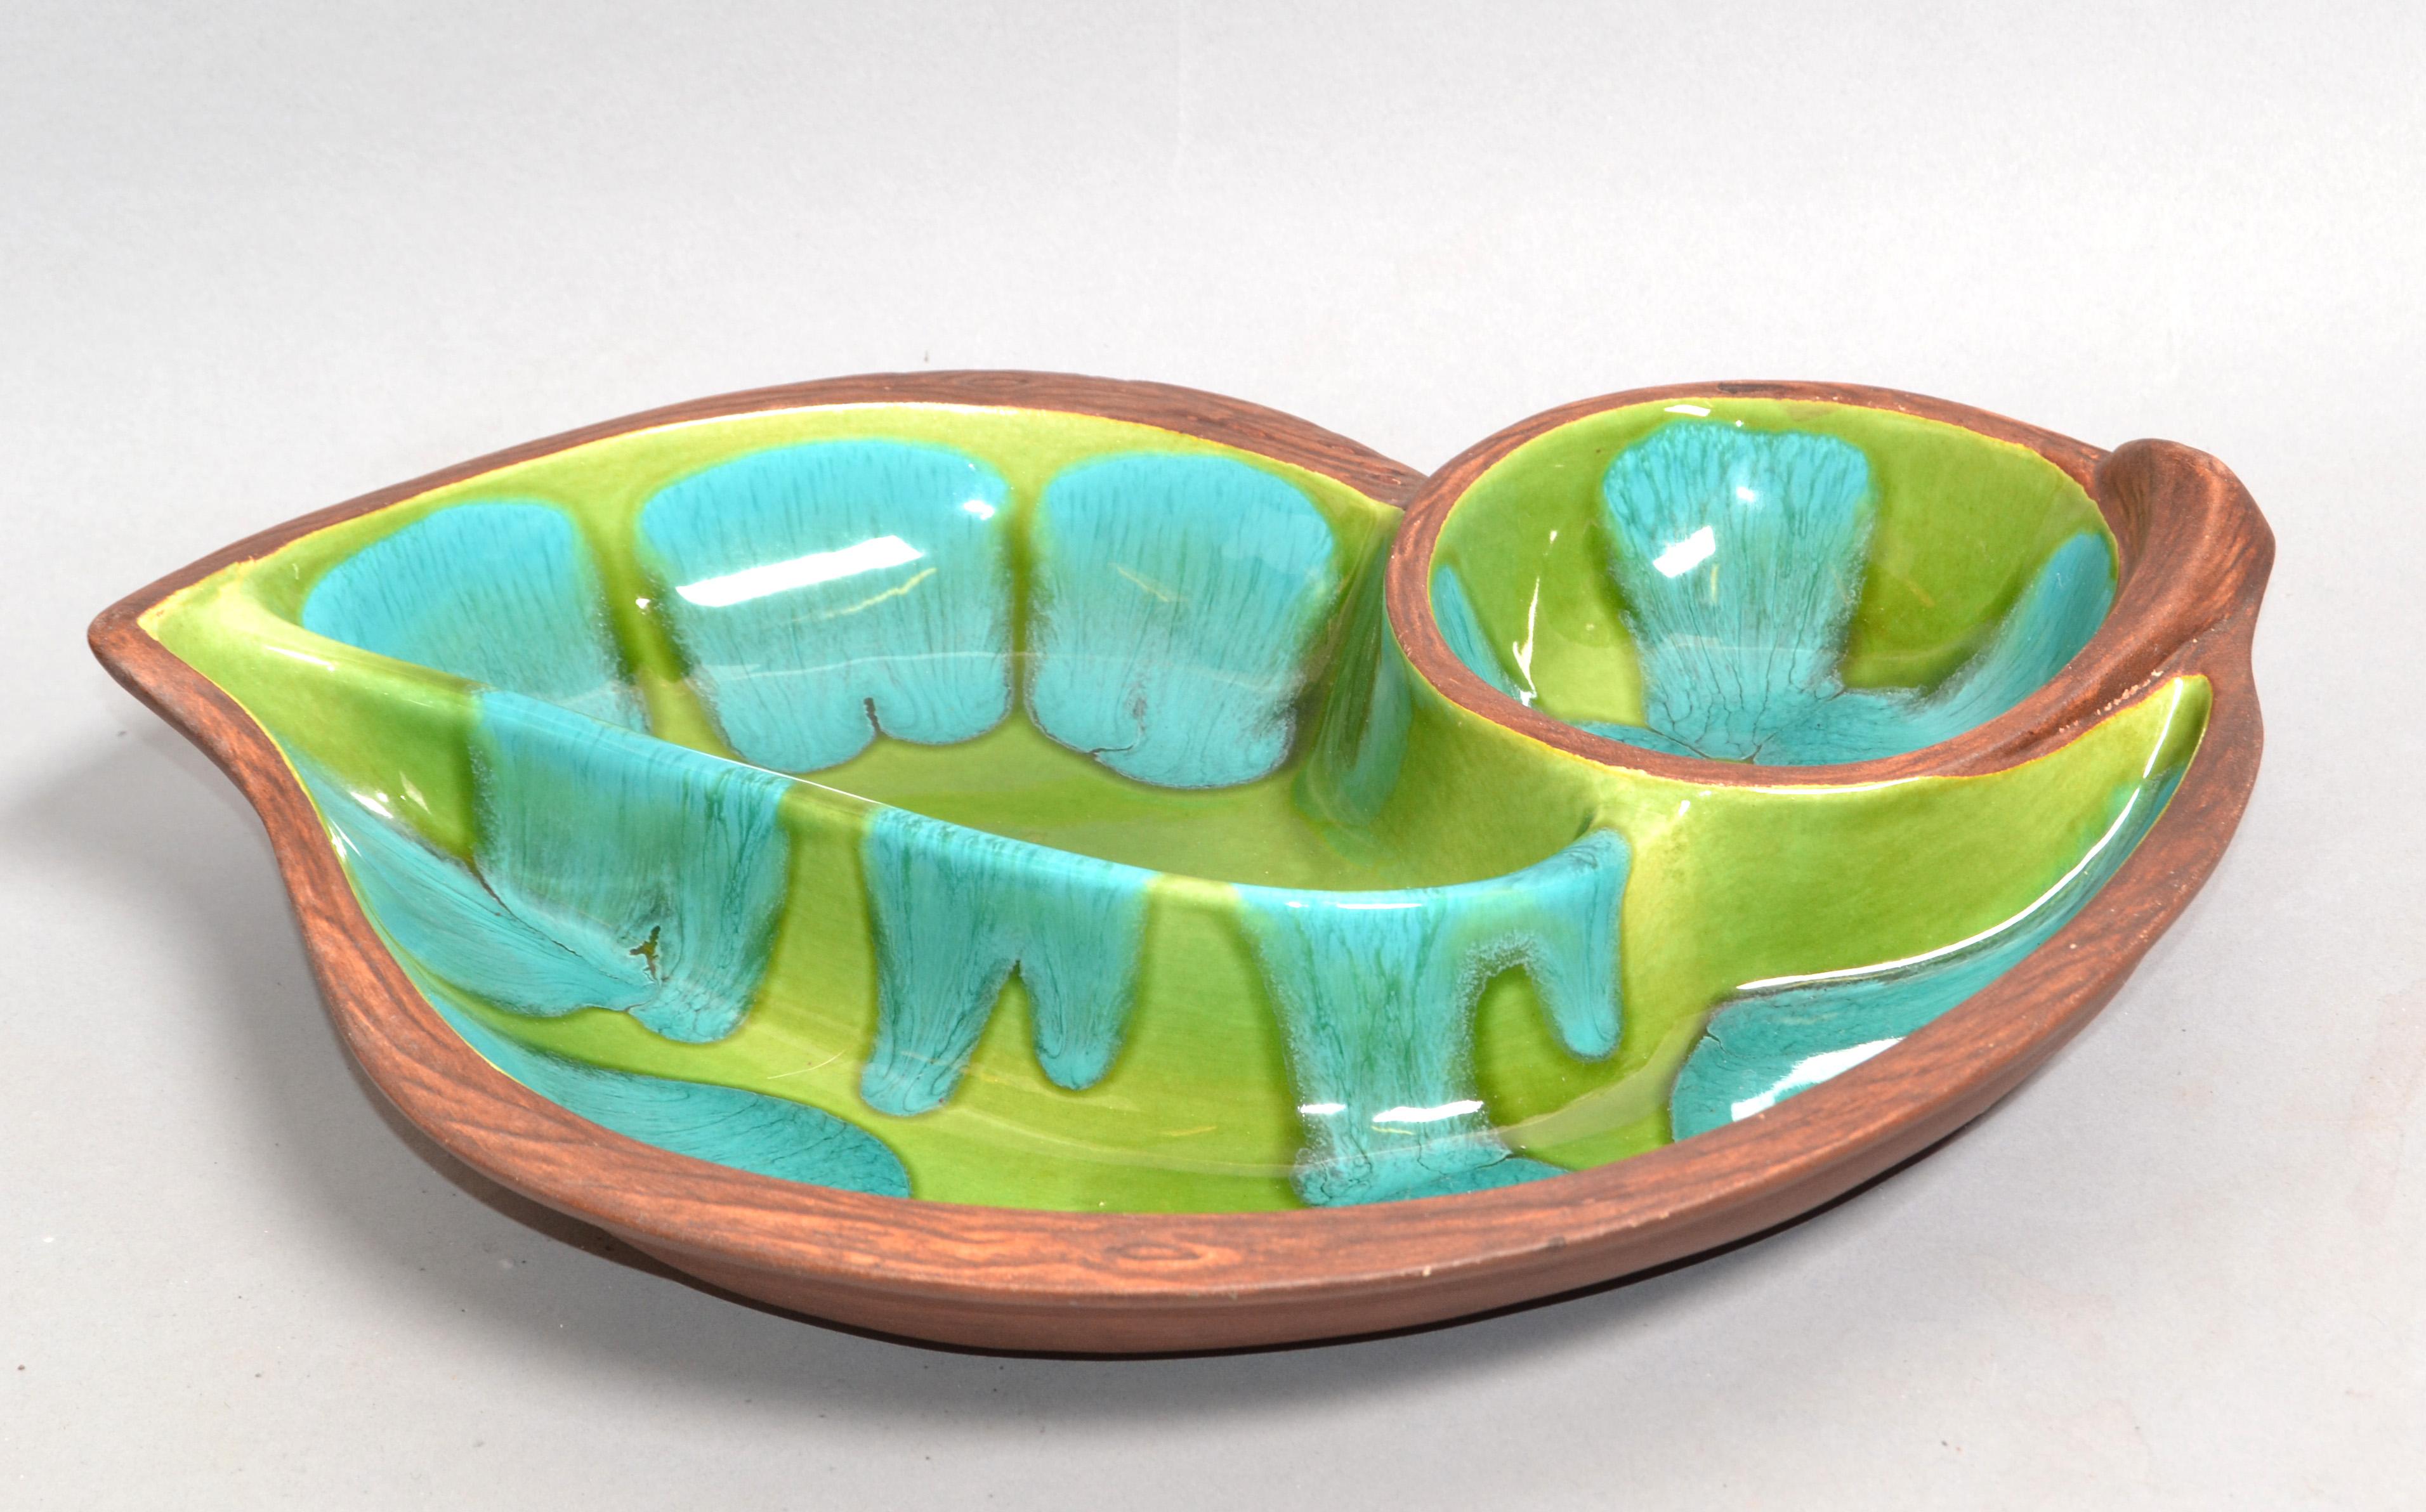 Mid-Century Modern Royal Haeger Style pottery 3 compartments, chips and dip dish in turquoise, green and brown. 
Glazed on the Top and marked at the base, USA 602.
Mid-Century Modern handcrafted Pottery made in America.
Impressive and practical as